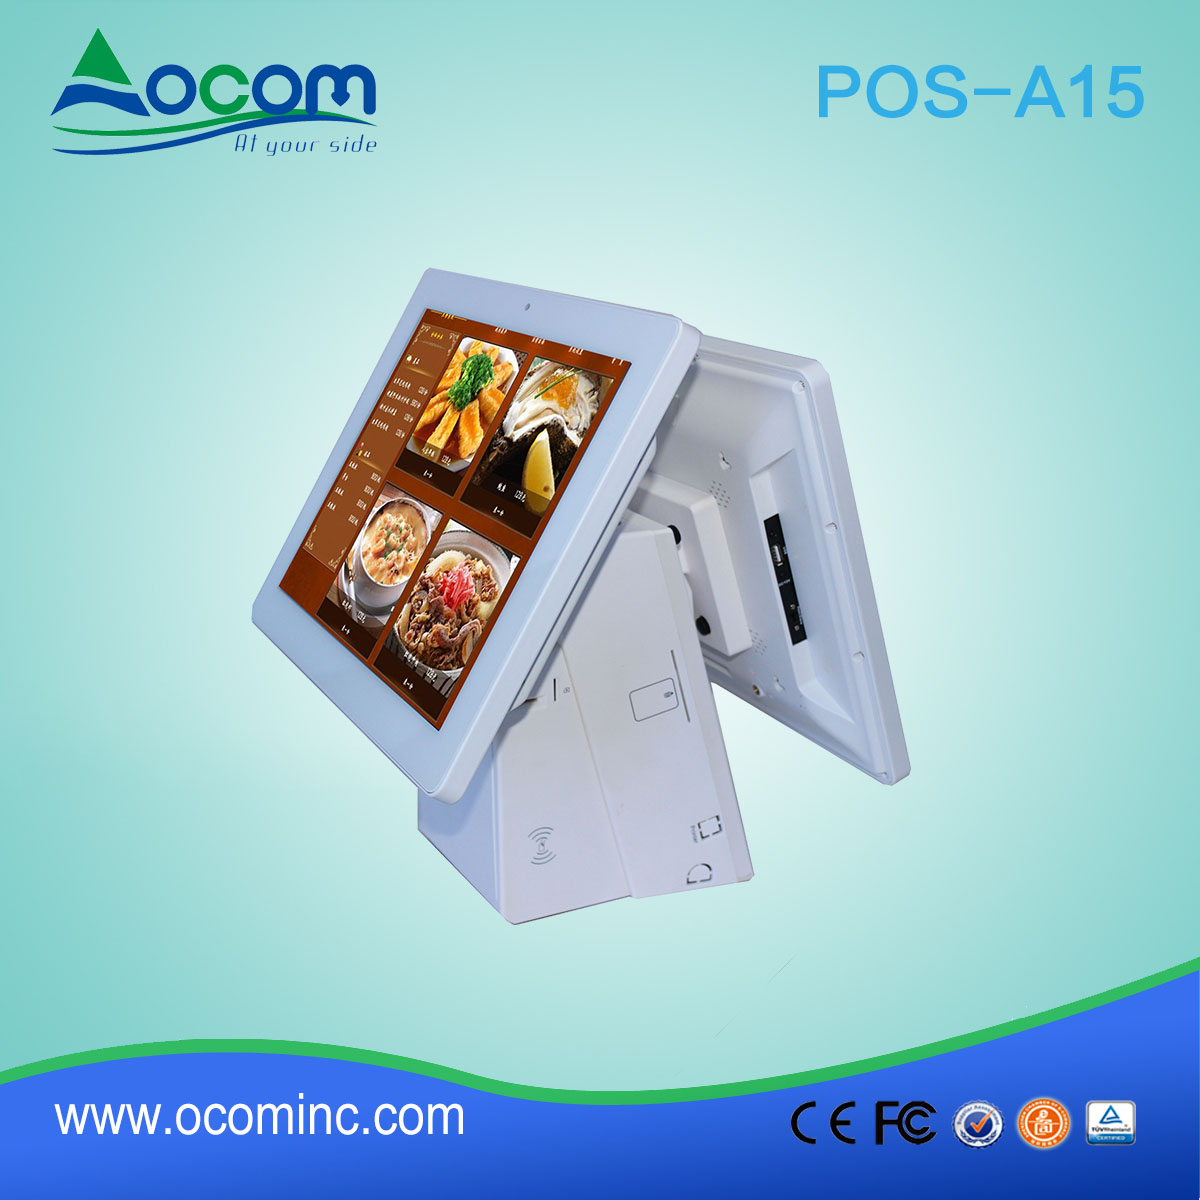 (POS-A15) Windows \/ Android Touch screen POS Terminal con 58mm \/ 80mm stampante termica